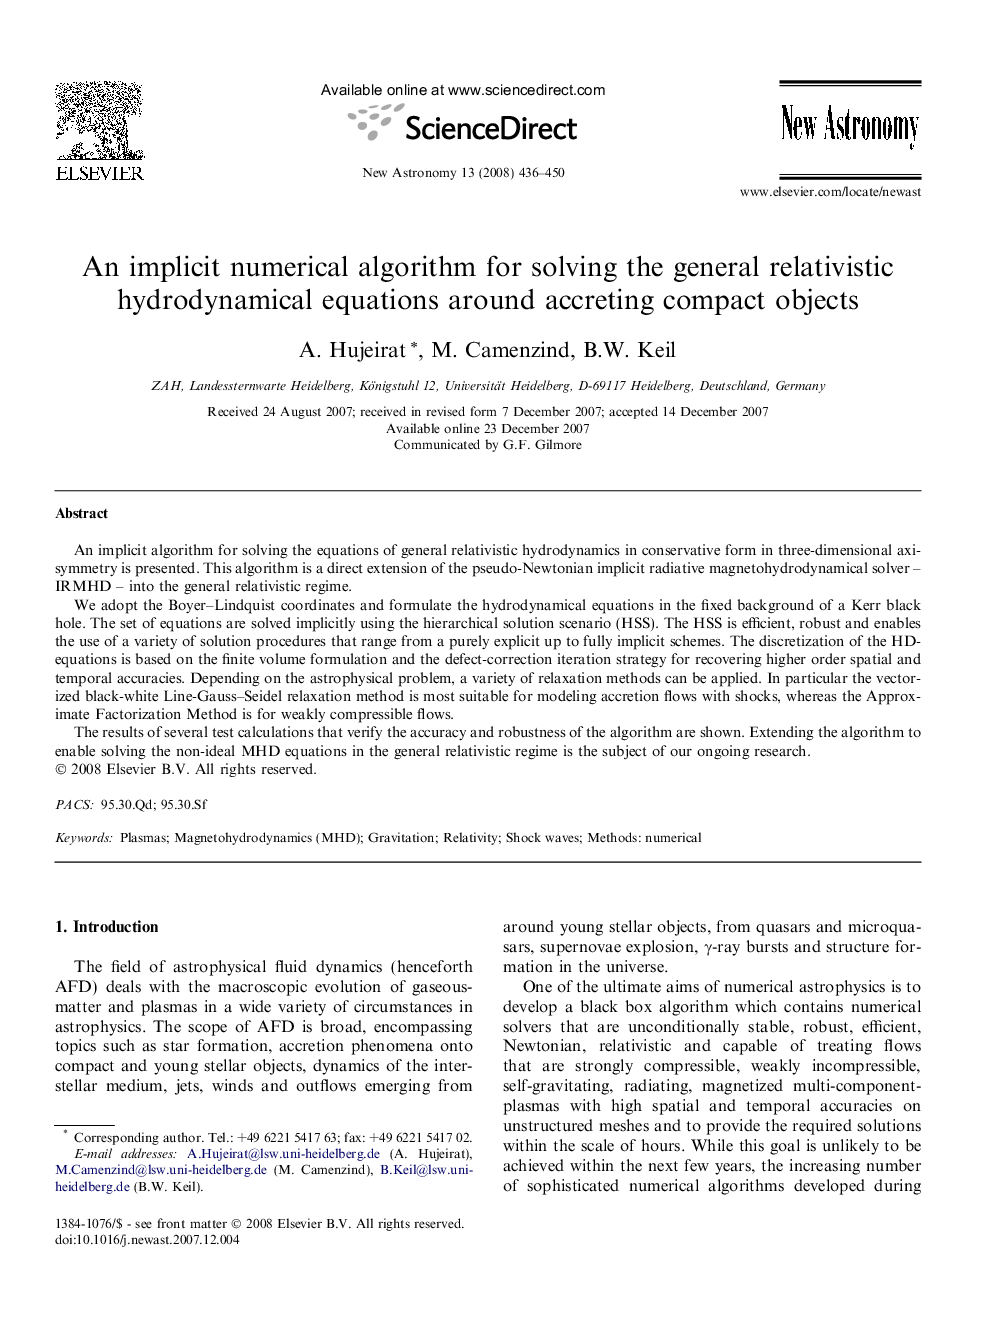 An implicit numerical algorithm for solving the general relativistic hydrodynamical equations around accreting compact objects